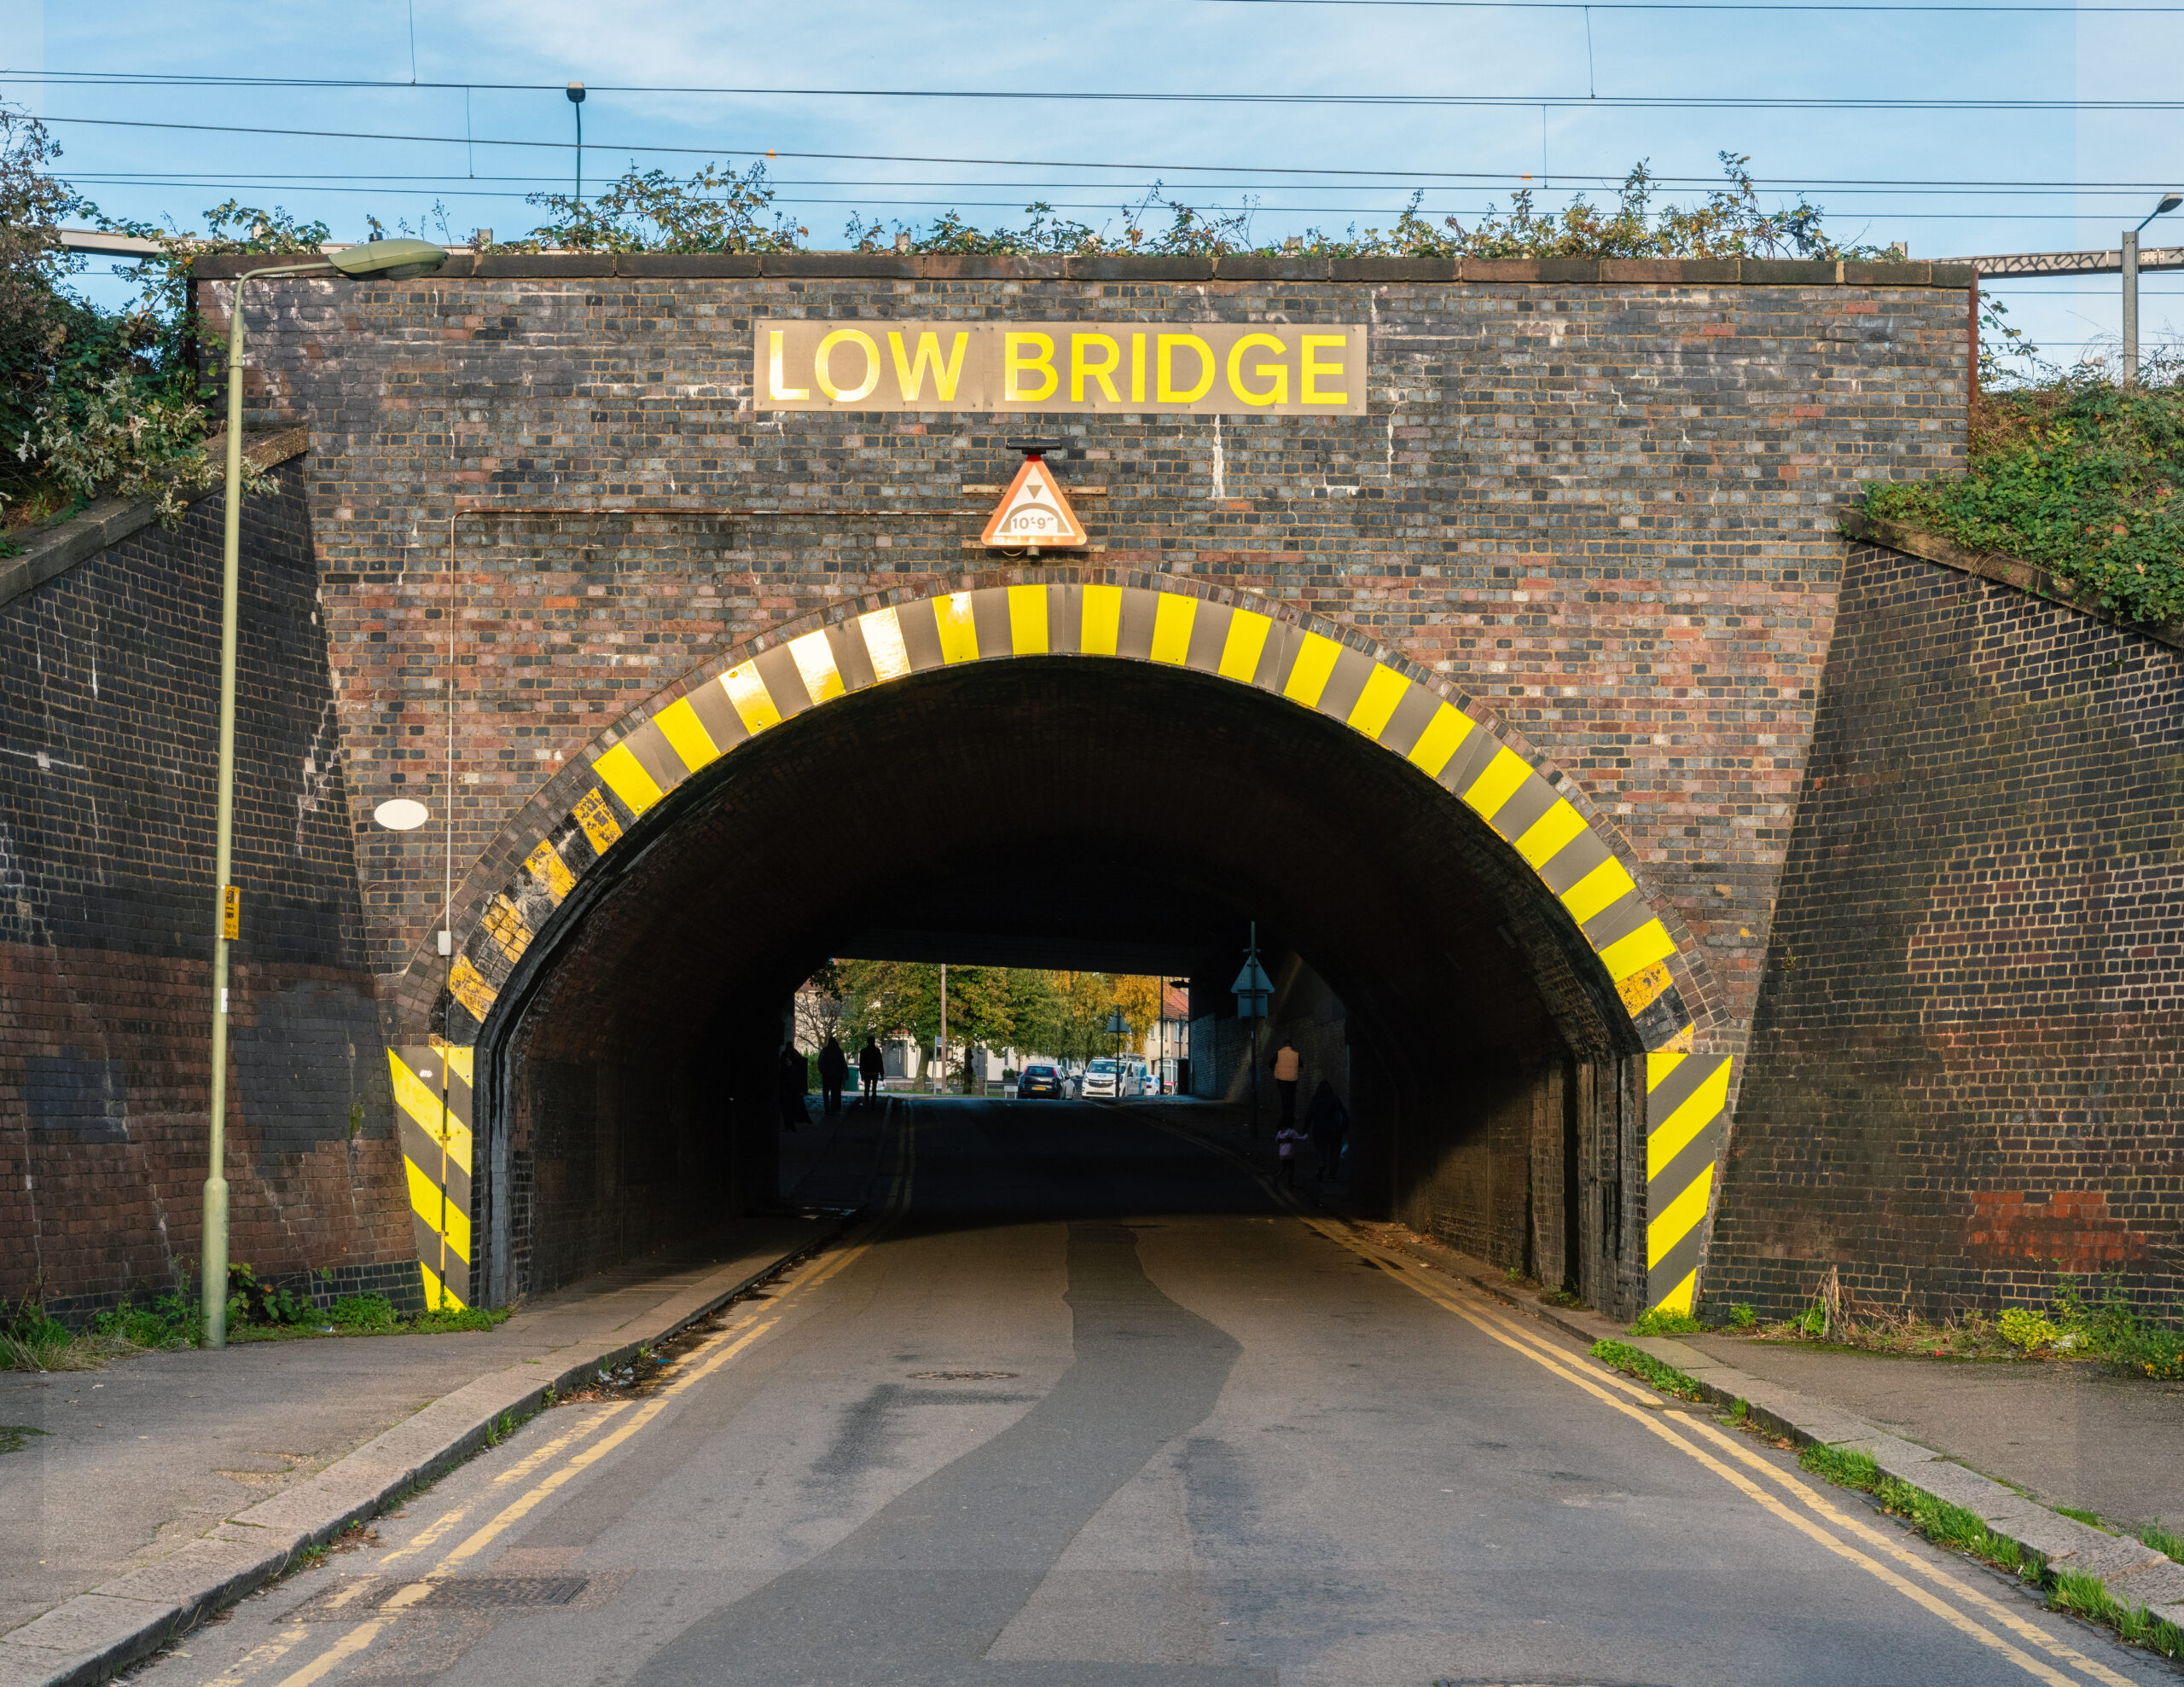 Low,Bridge,Warning,To,Drivers,About,The,Height,Restriction.